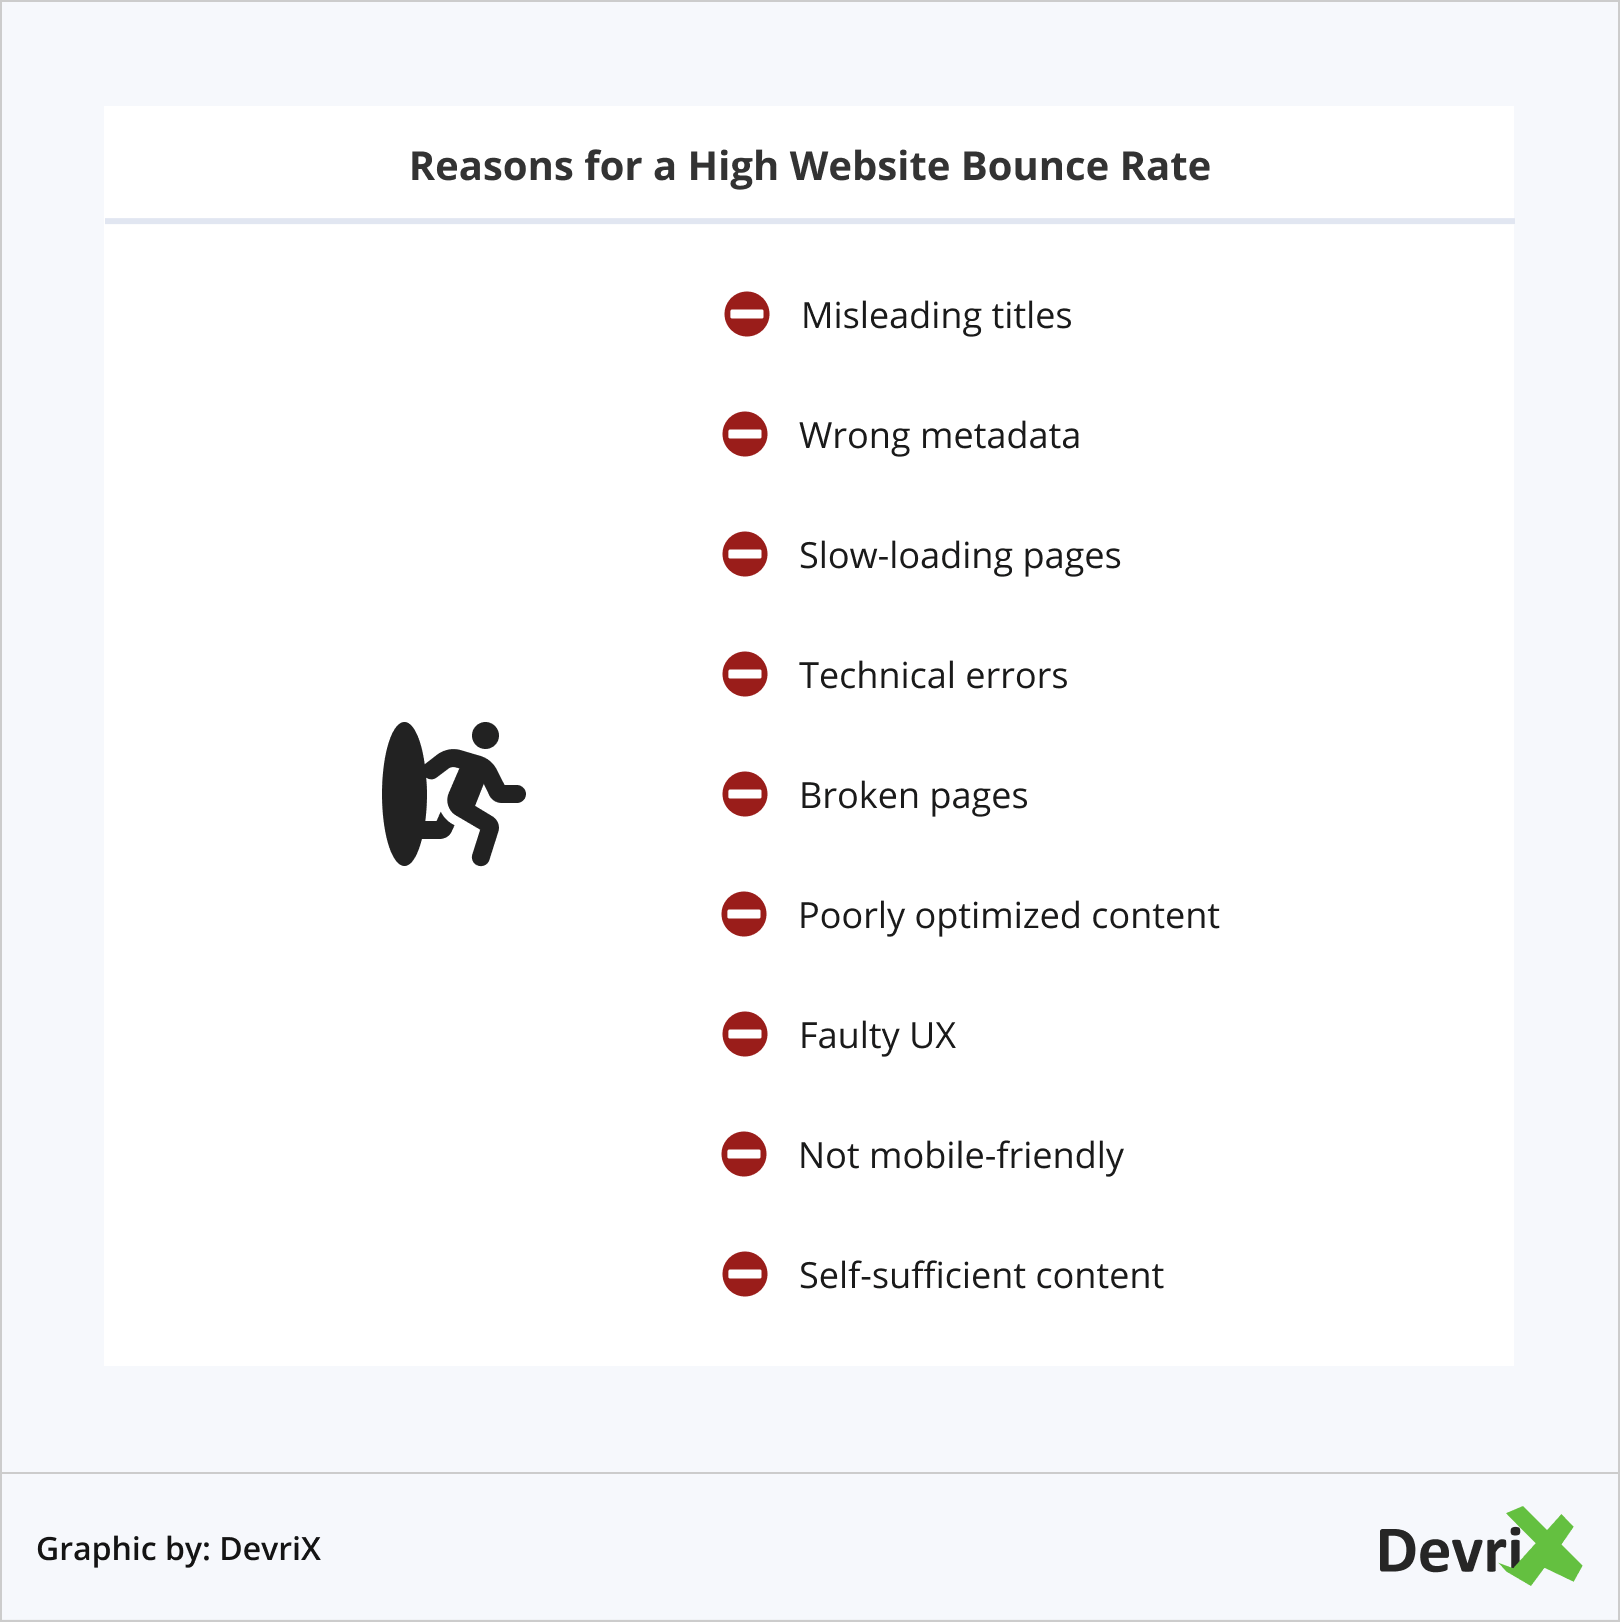 Reasons for a High Website Bounce Rate